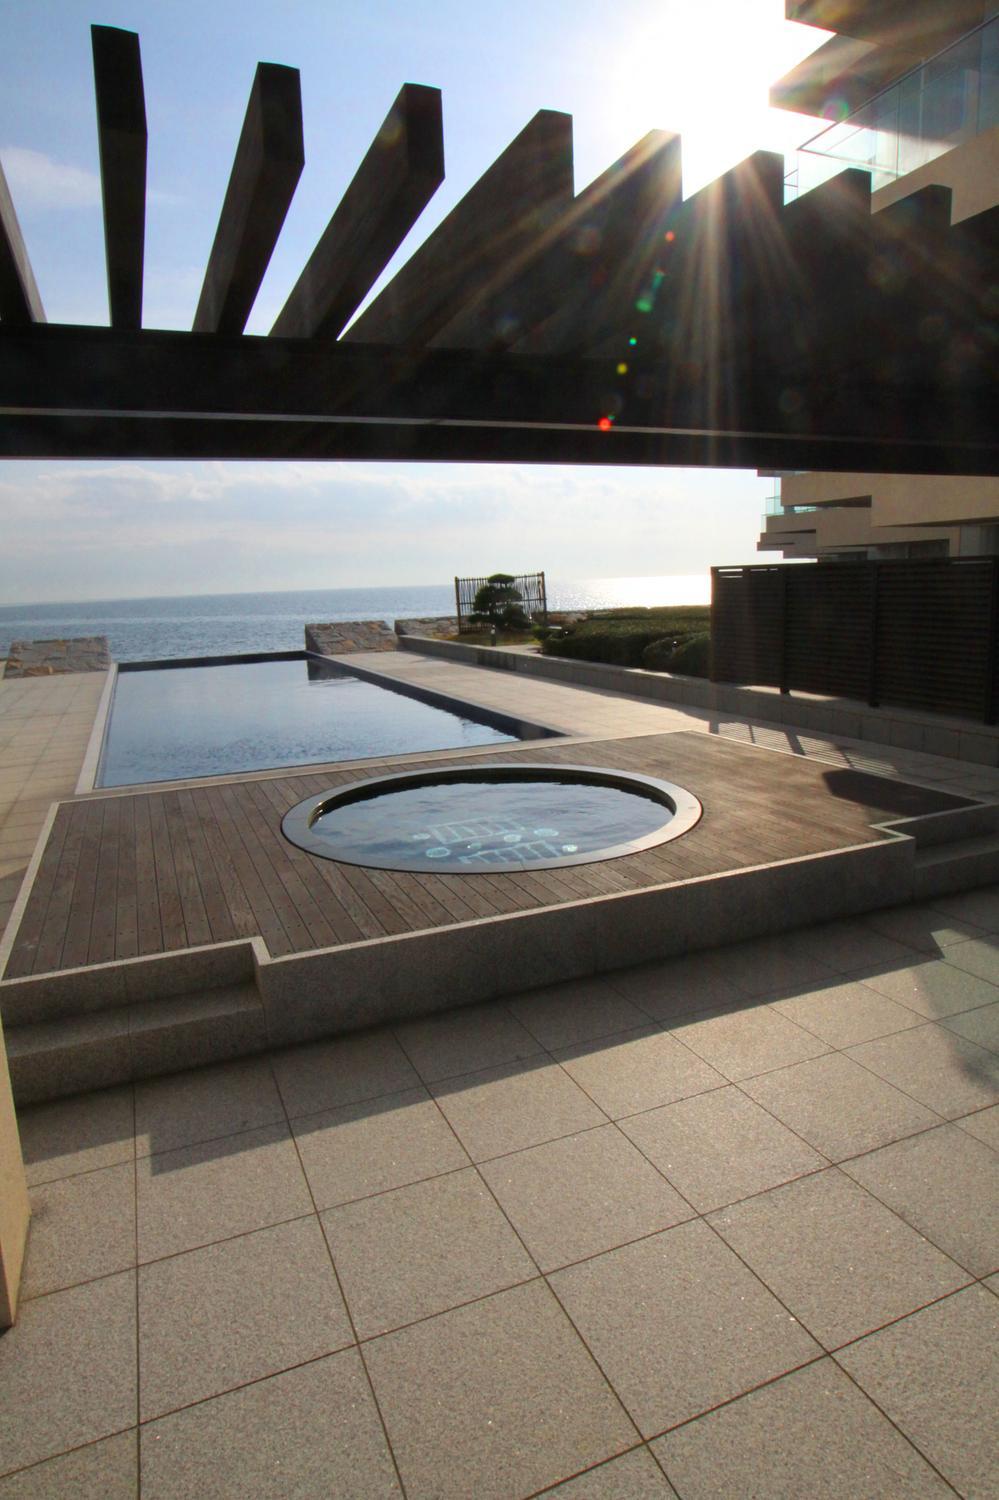 Other common areas. Pool and Jacuzzi that can be shared use. It is a space in which there is a blue sky and the sea and the sense of unity.